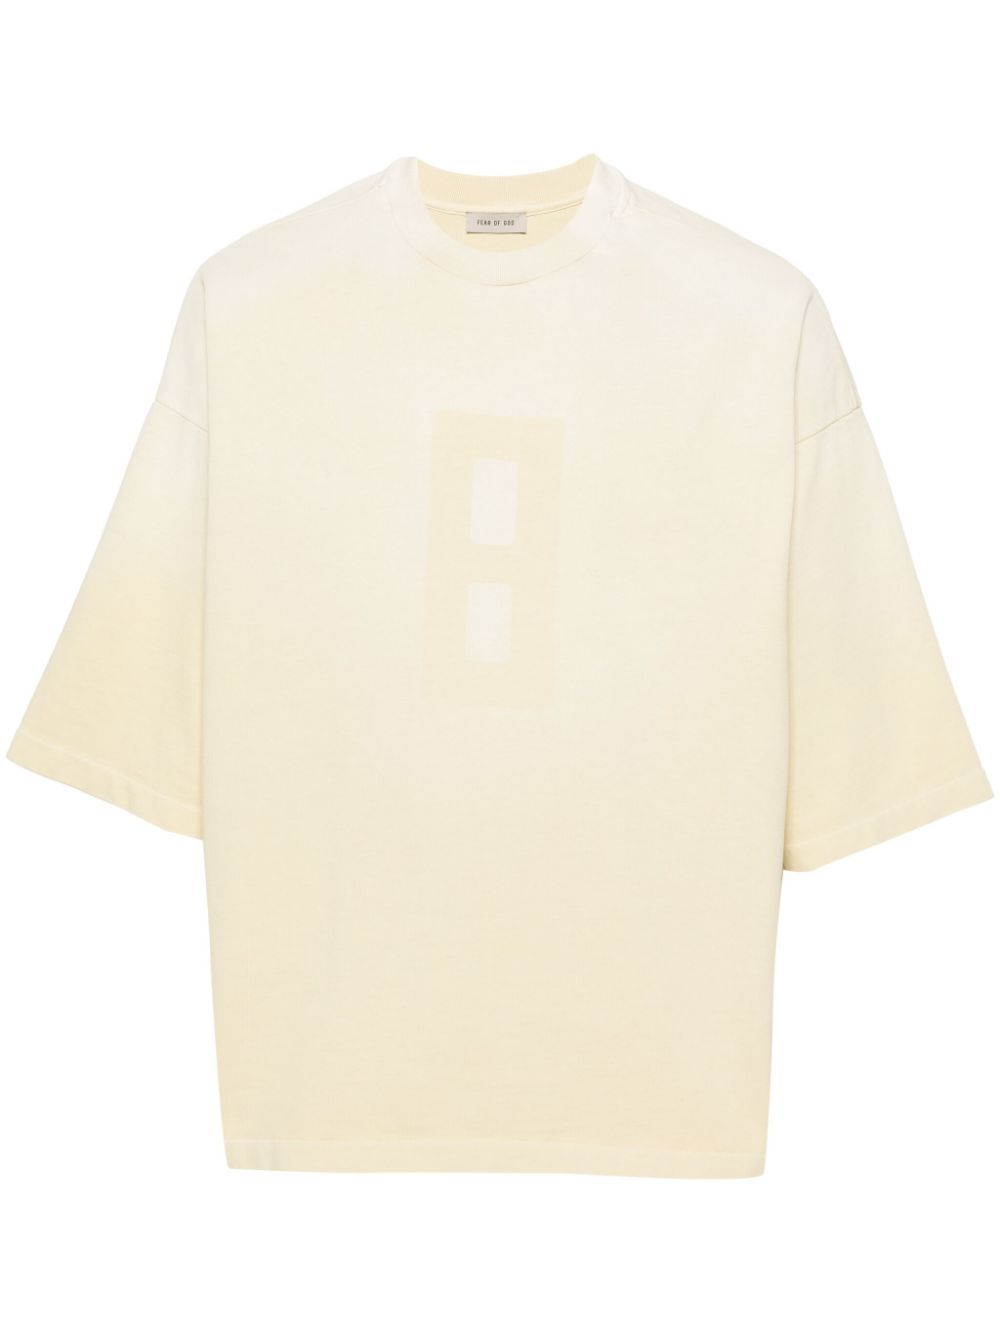 FEAR OF GOD AIRBRUSH 8 NUMBER-PRINT T-SHIRT